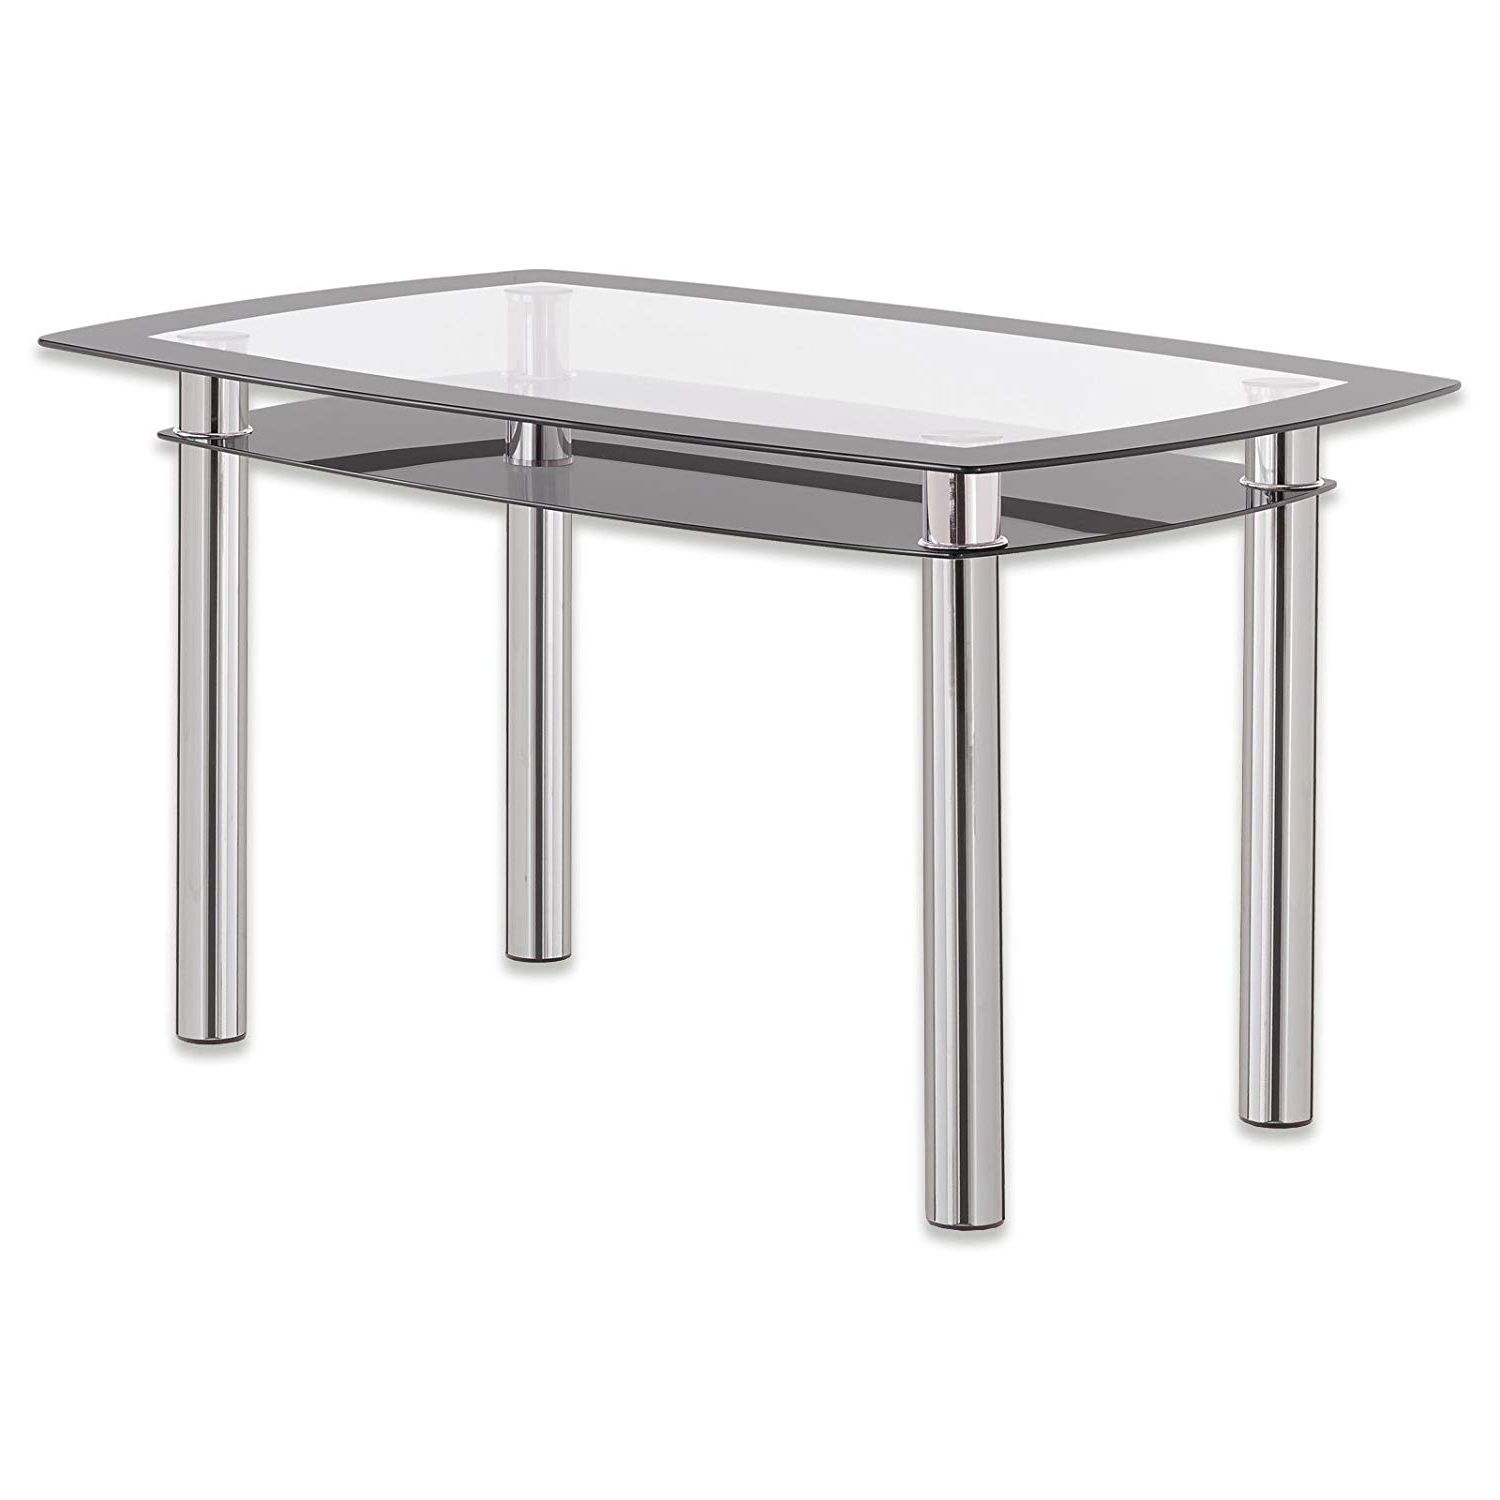 Chrome Dining Tables With Tempered Glass With Regard To Fashionable Carla Dining Table – Tempered Glass – Black Chrome: Amazon (View 24 of 25)